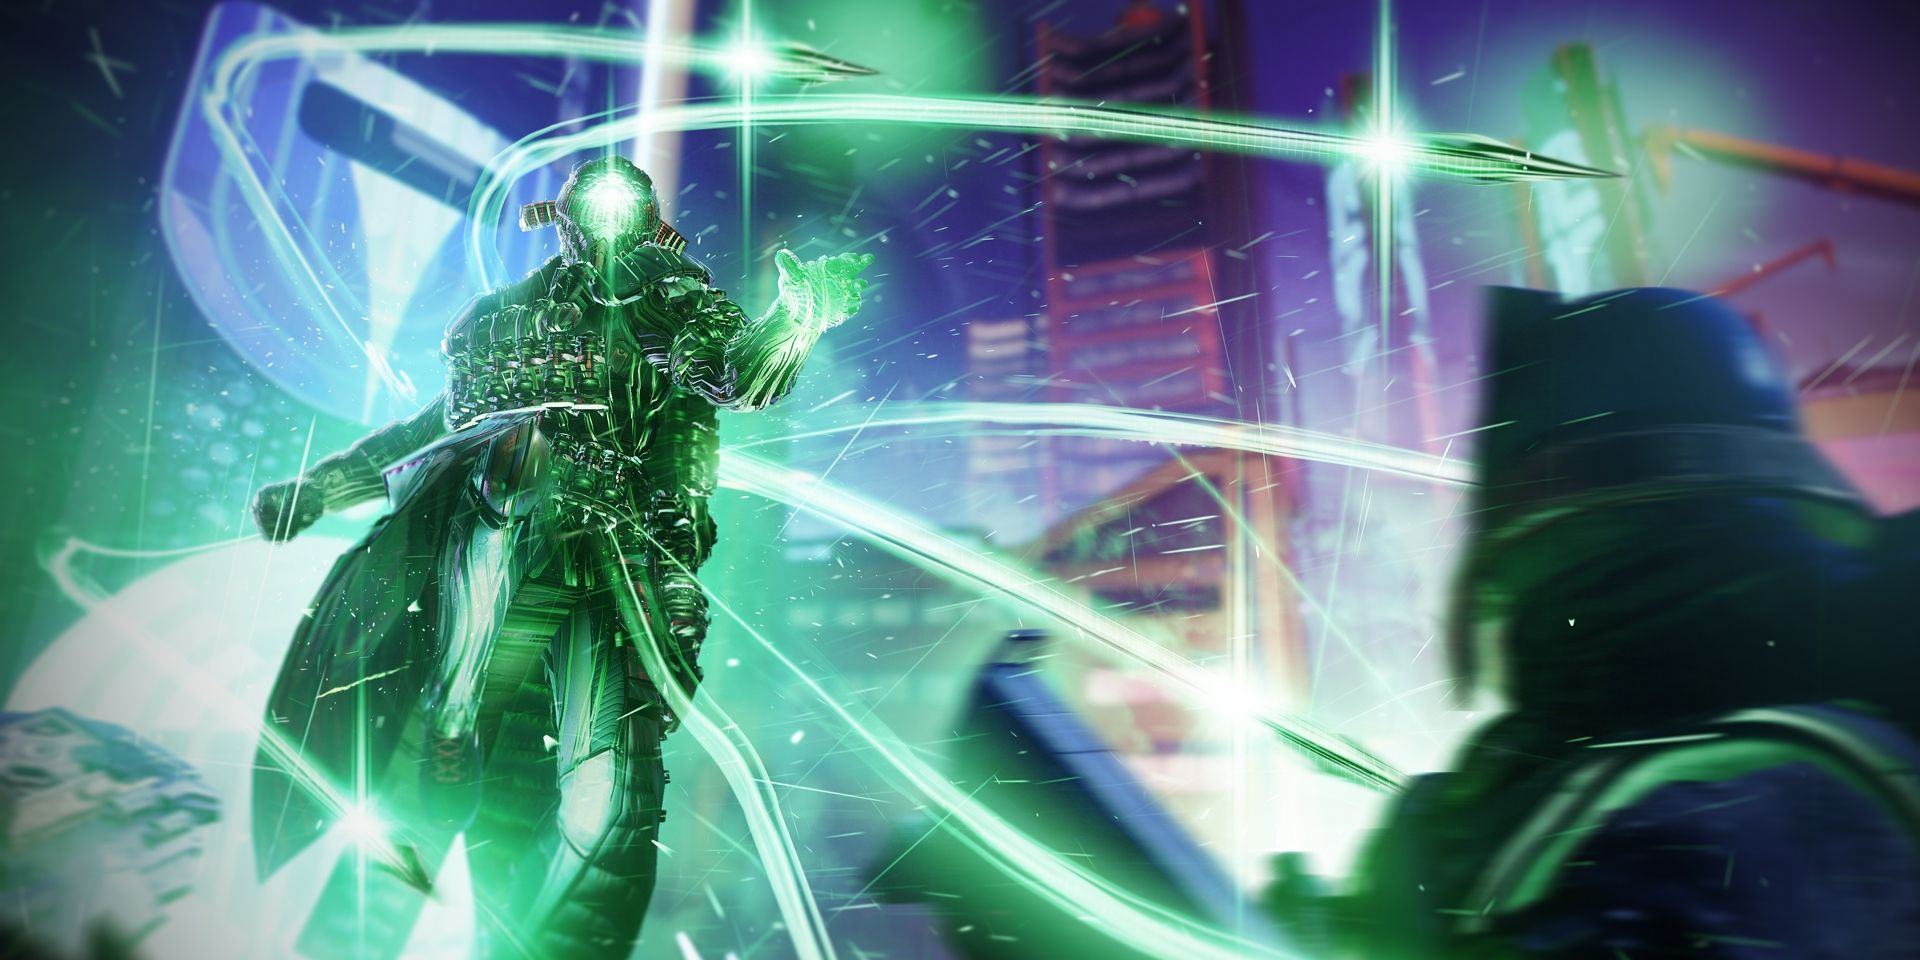 A Destiny 2 Strand Broodweaver Warlock in Lightfall armor unleashing their Needlestorm Super Ability upon a Cabal opponent, with Neomuna's landscape in the background.